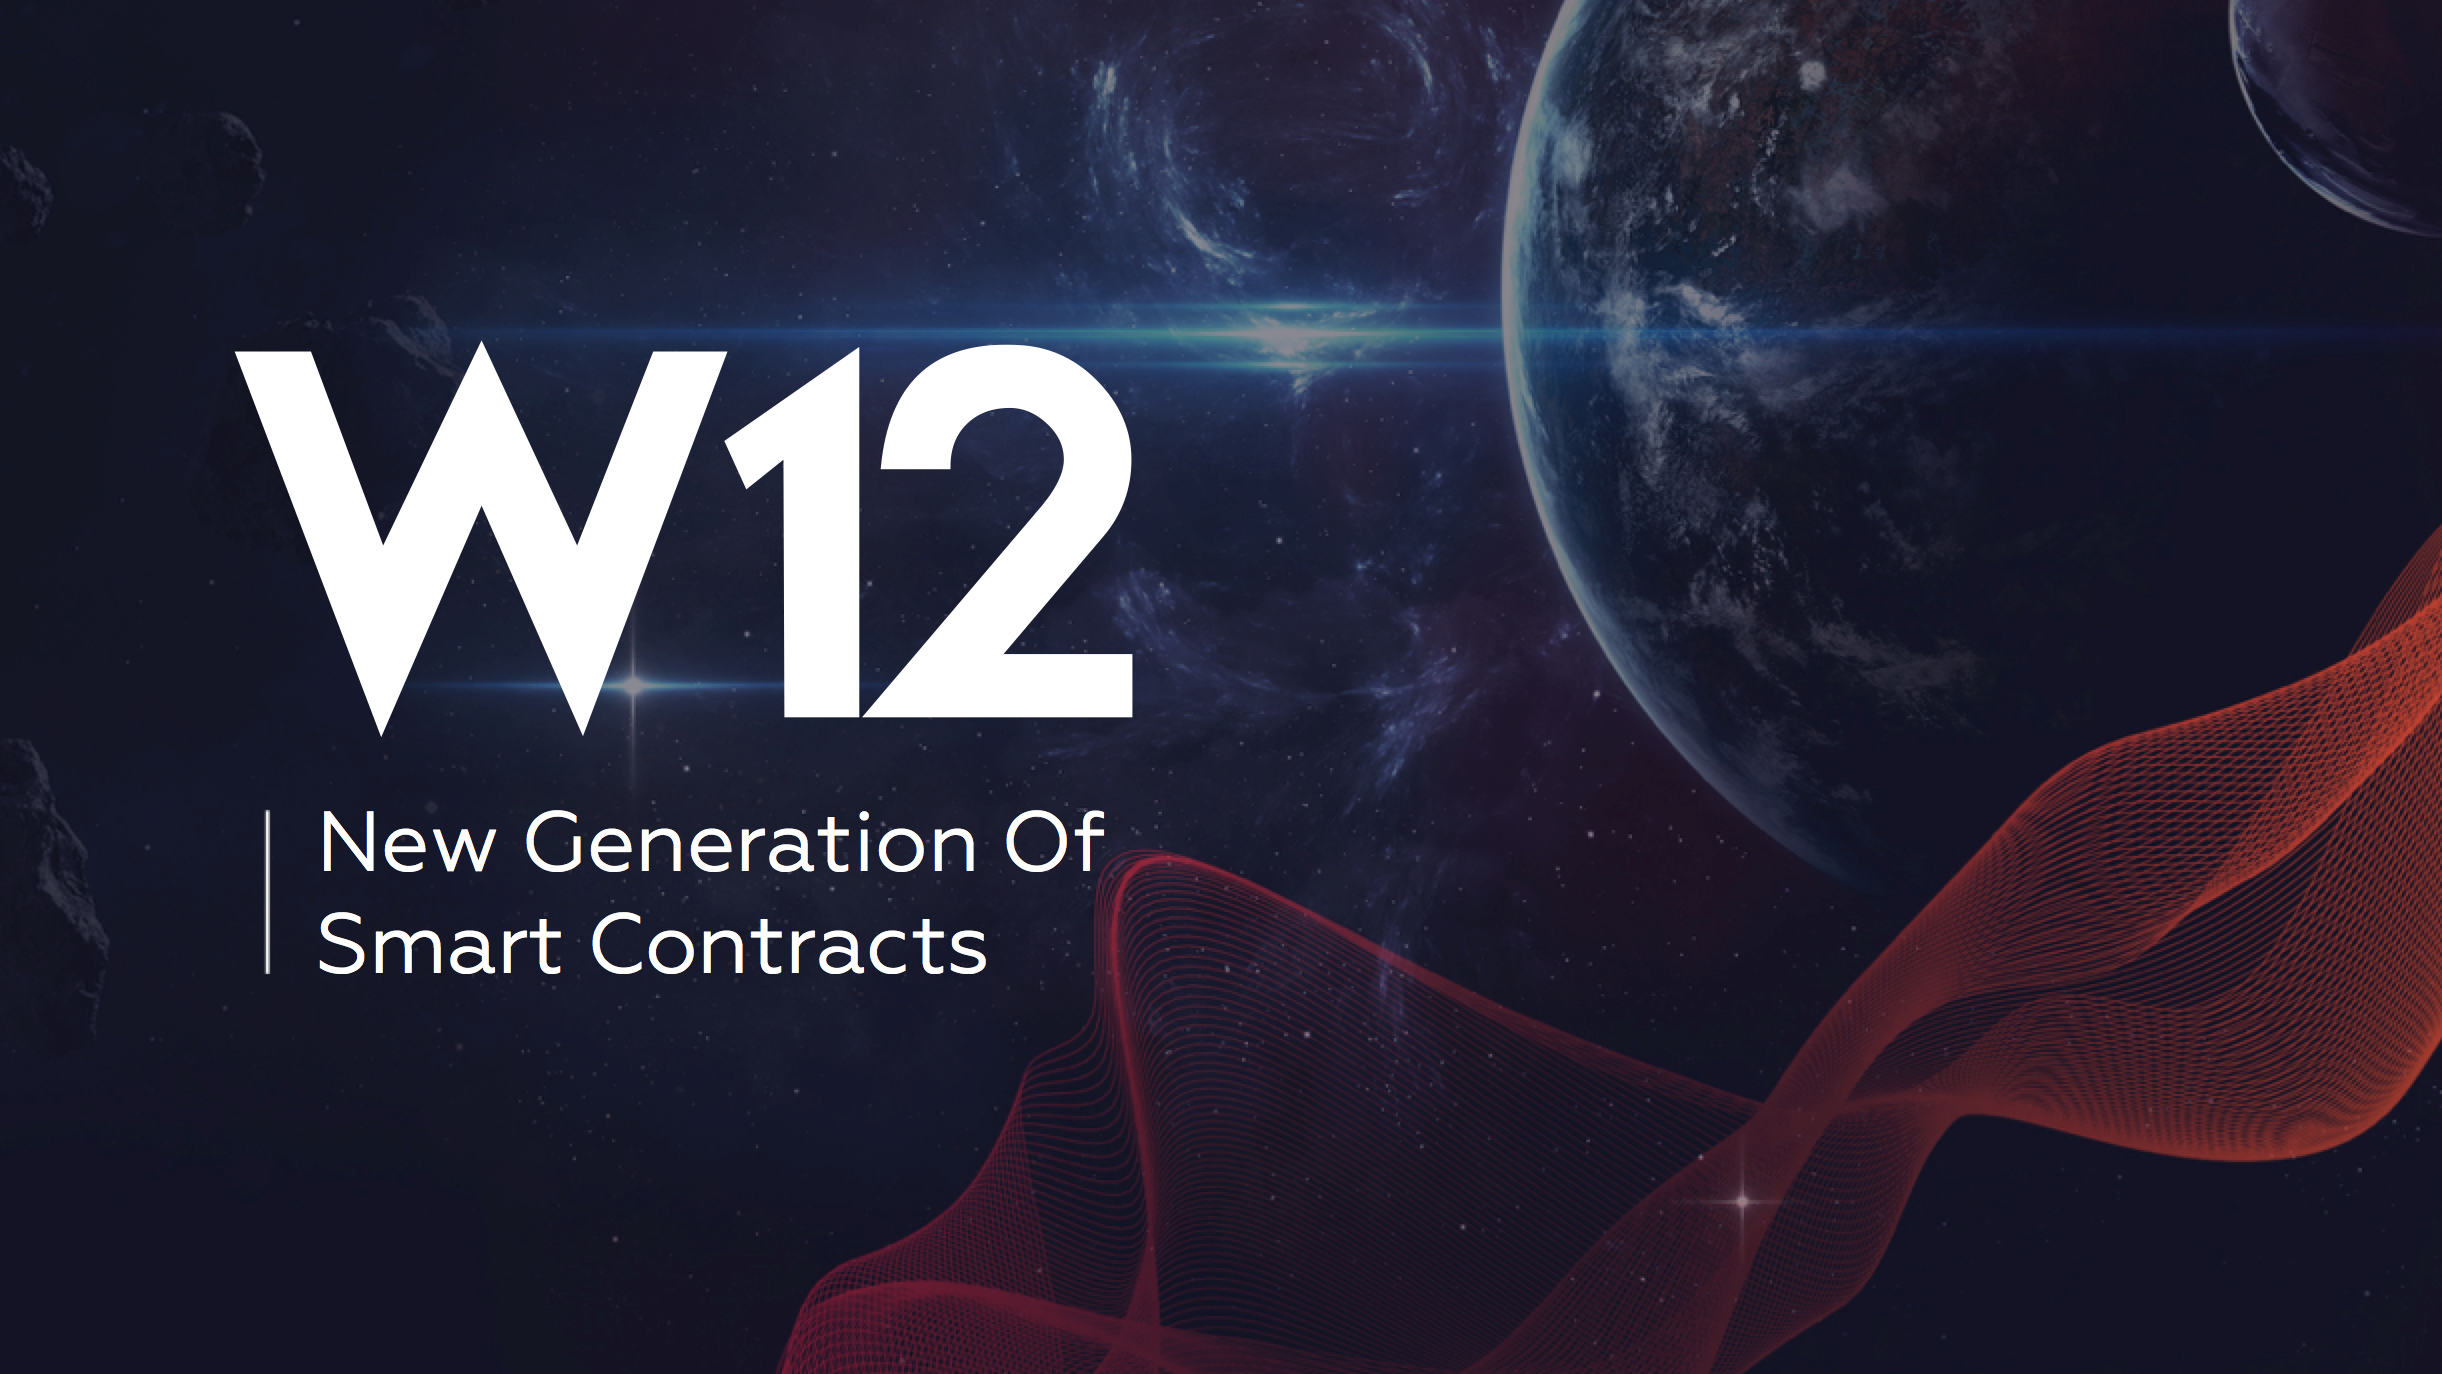 W12 - a Platform Raising New Generation of Smart Contracts - Winner at the World Blockchain Forum (NYC)